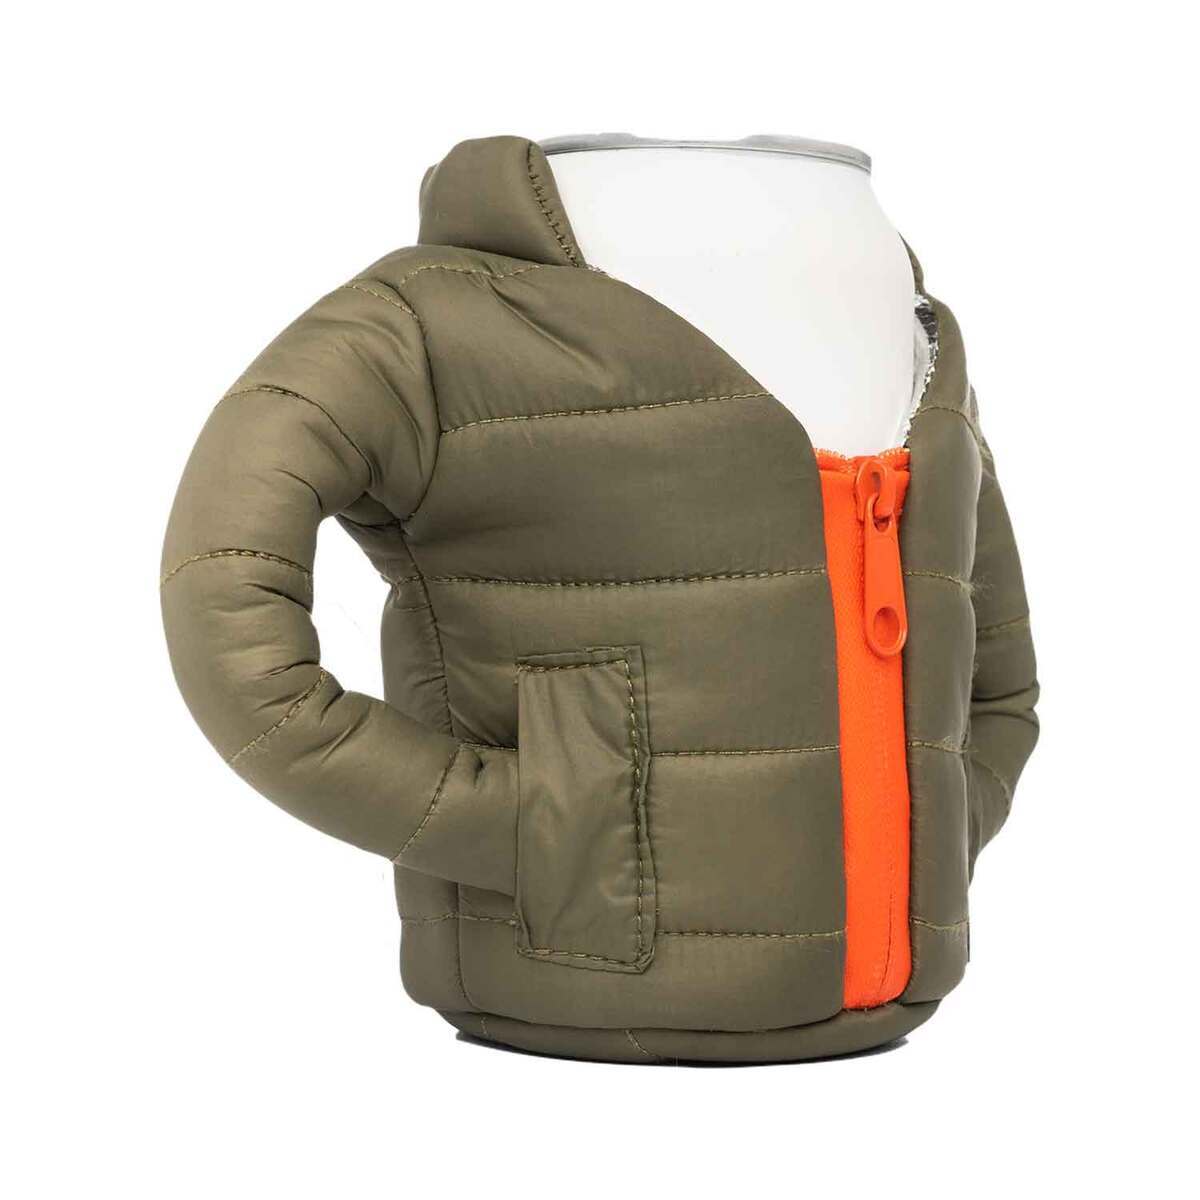 Puffin Coolers Beverage Jacket Cozy - Green and Orange | Sportsman's ...